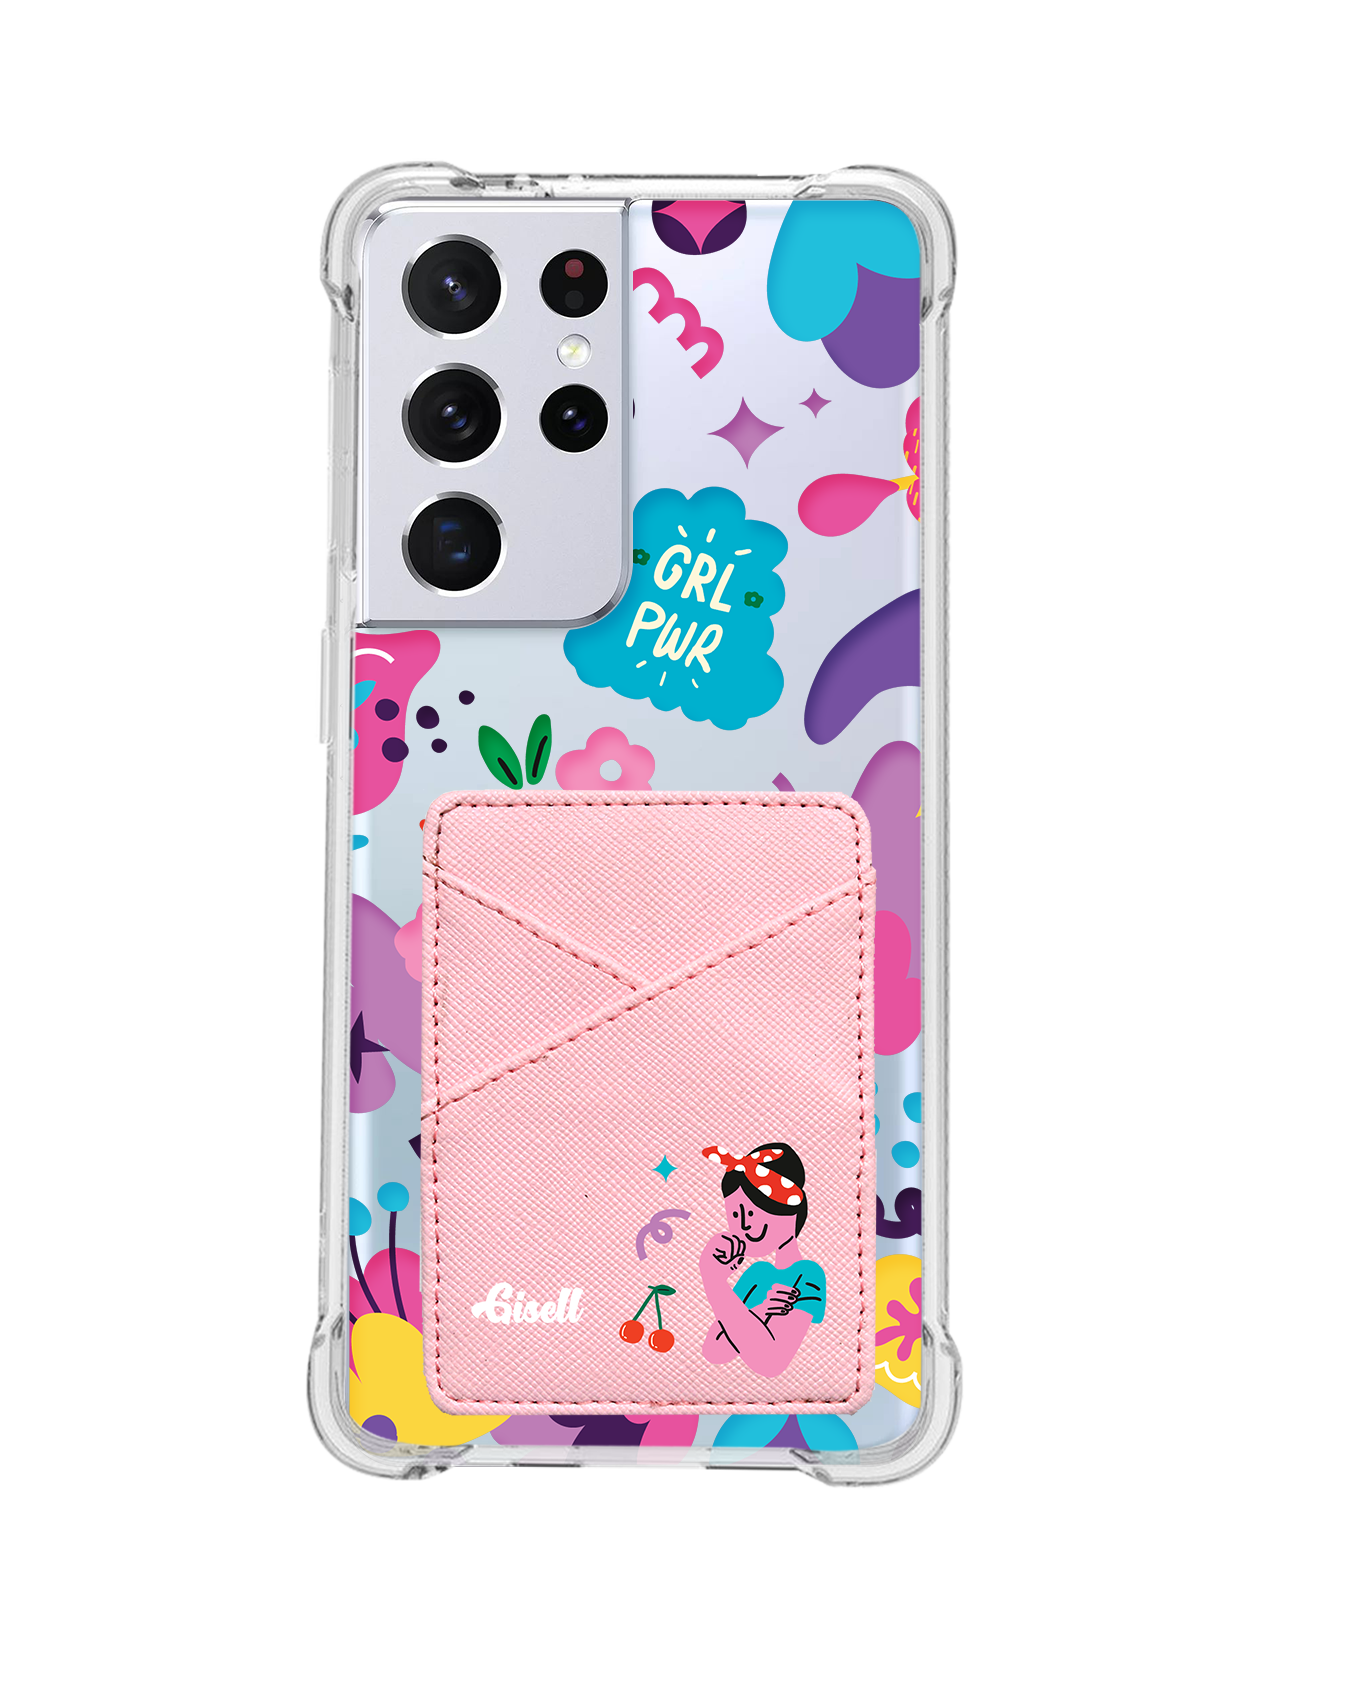 Android Phone Wallet Case - Girl Power 1.0